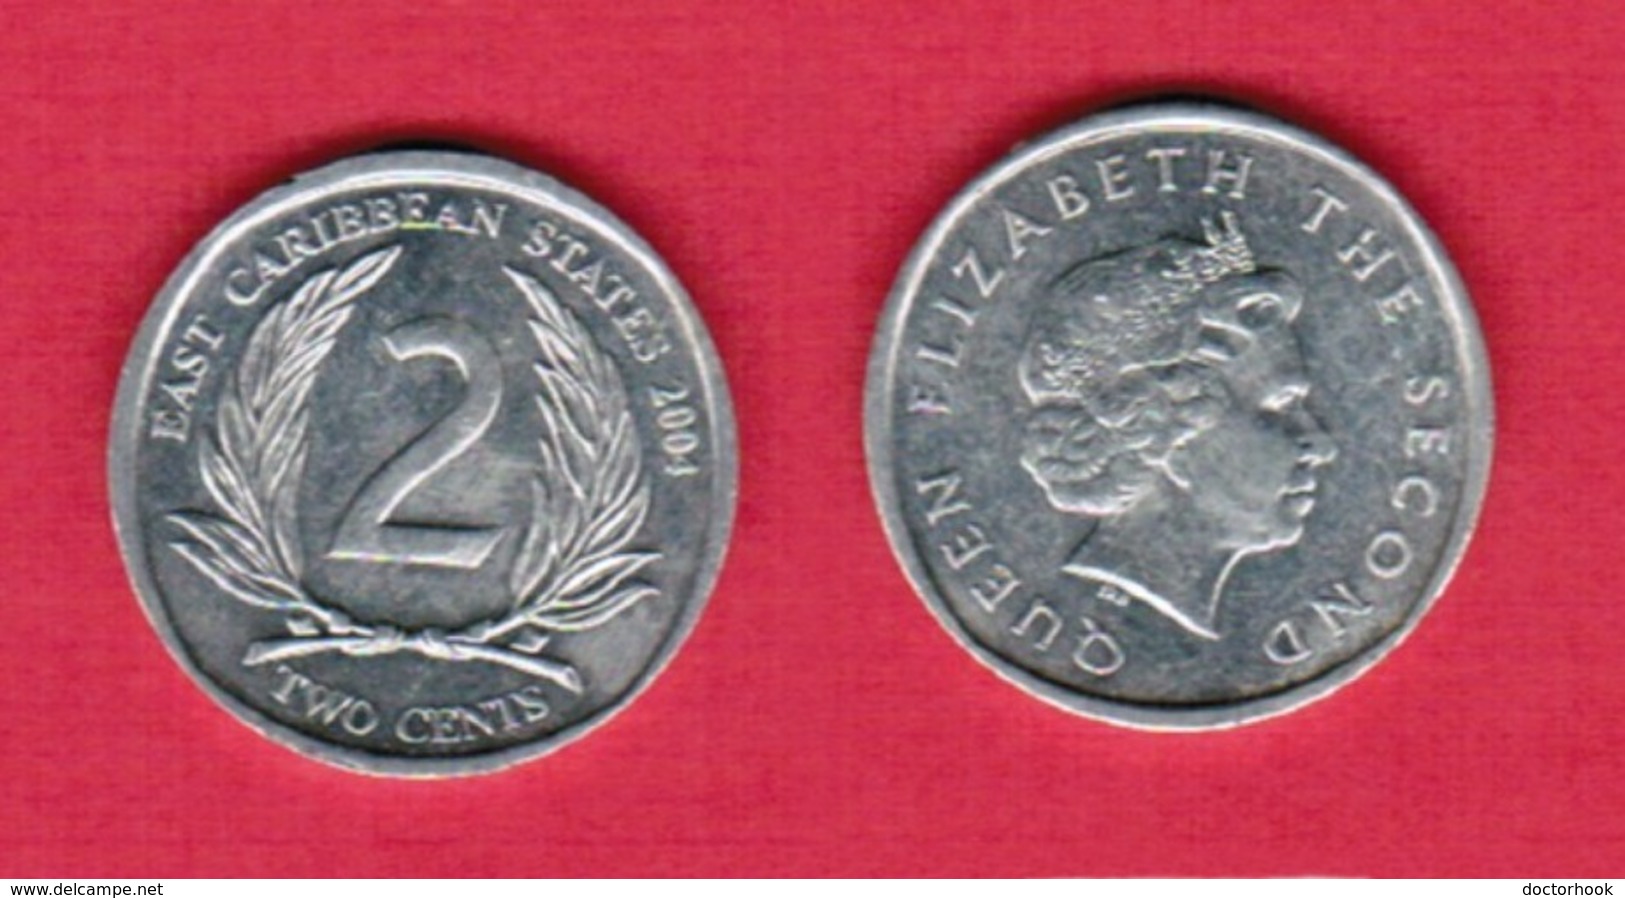 EAST CARIBBEAN STATES  2 CENTS 2004 (KM # 35) #5510 - East Caribbean States